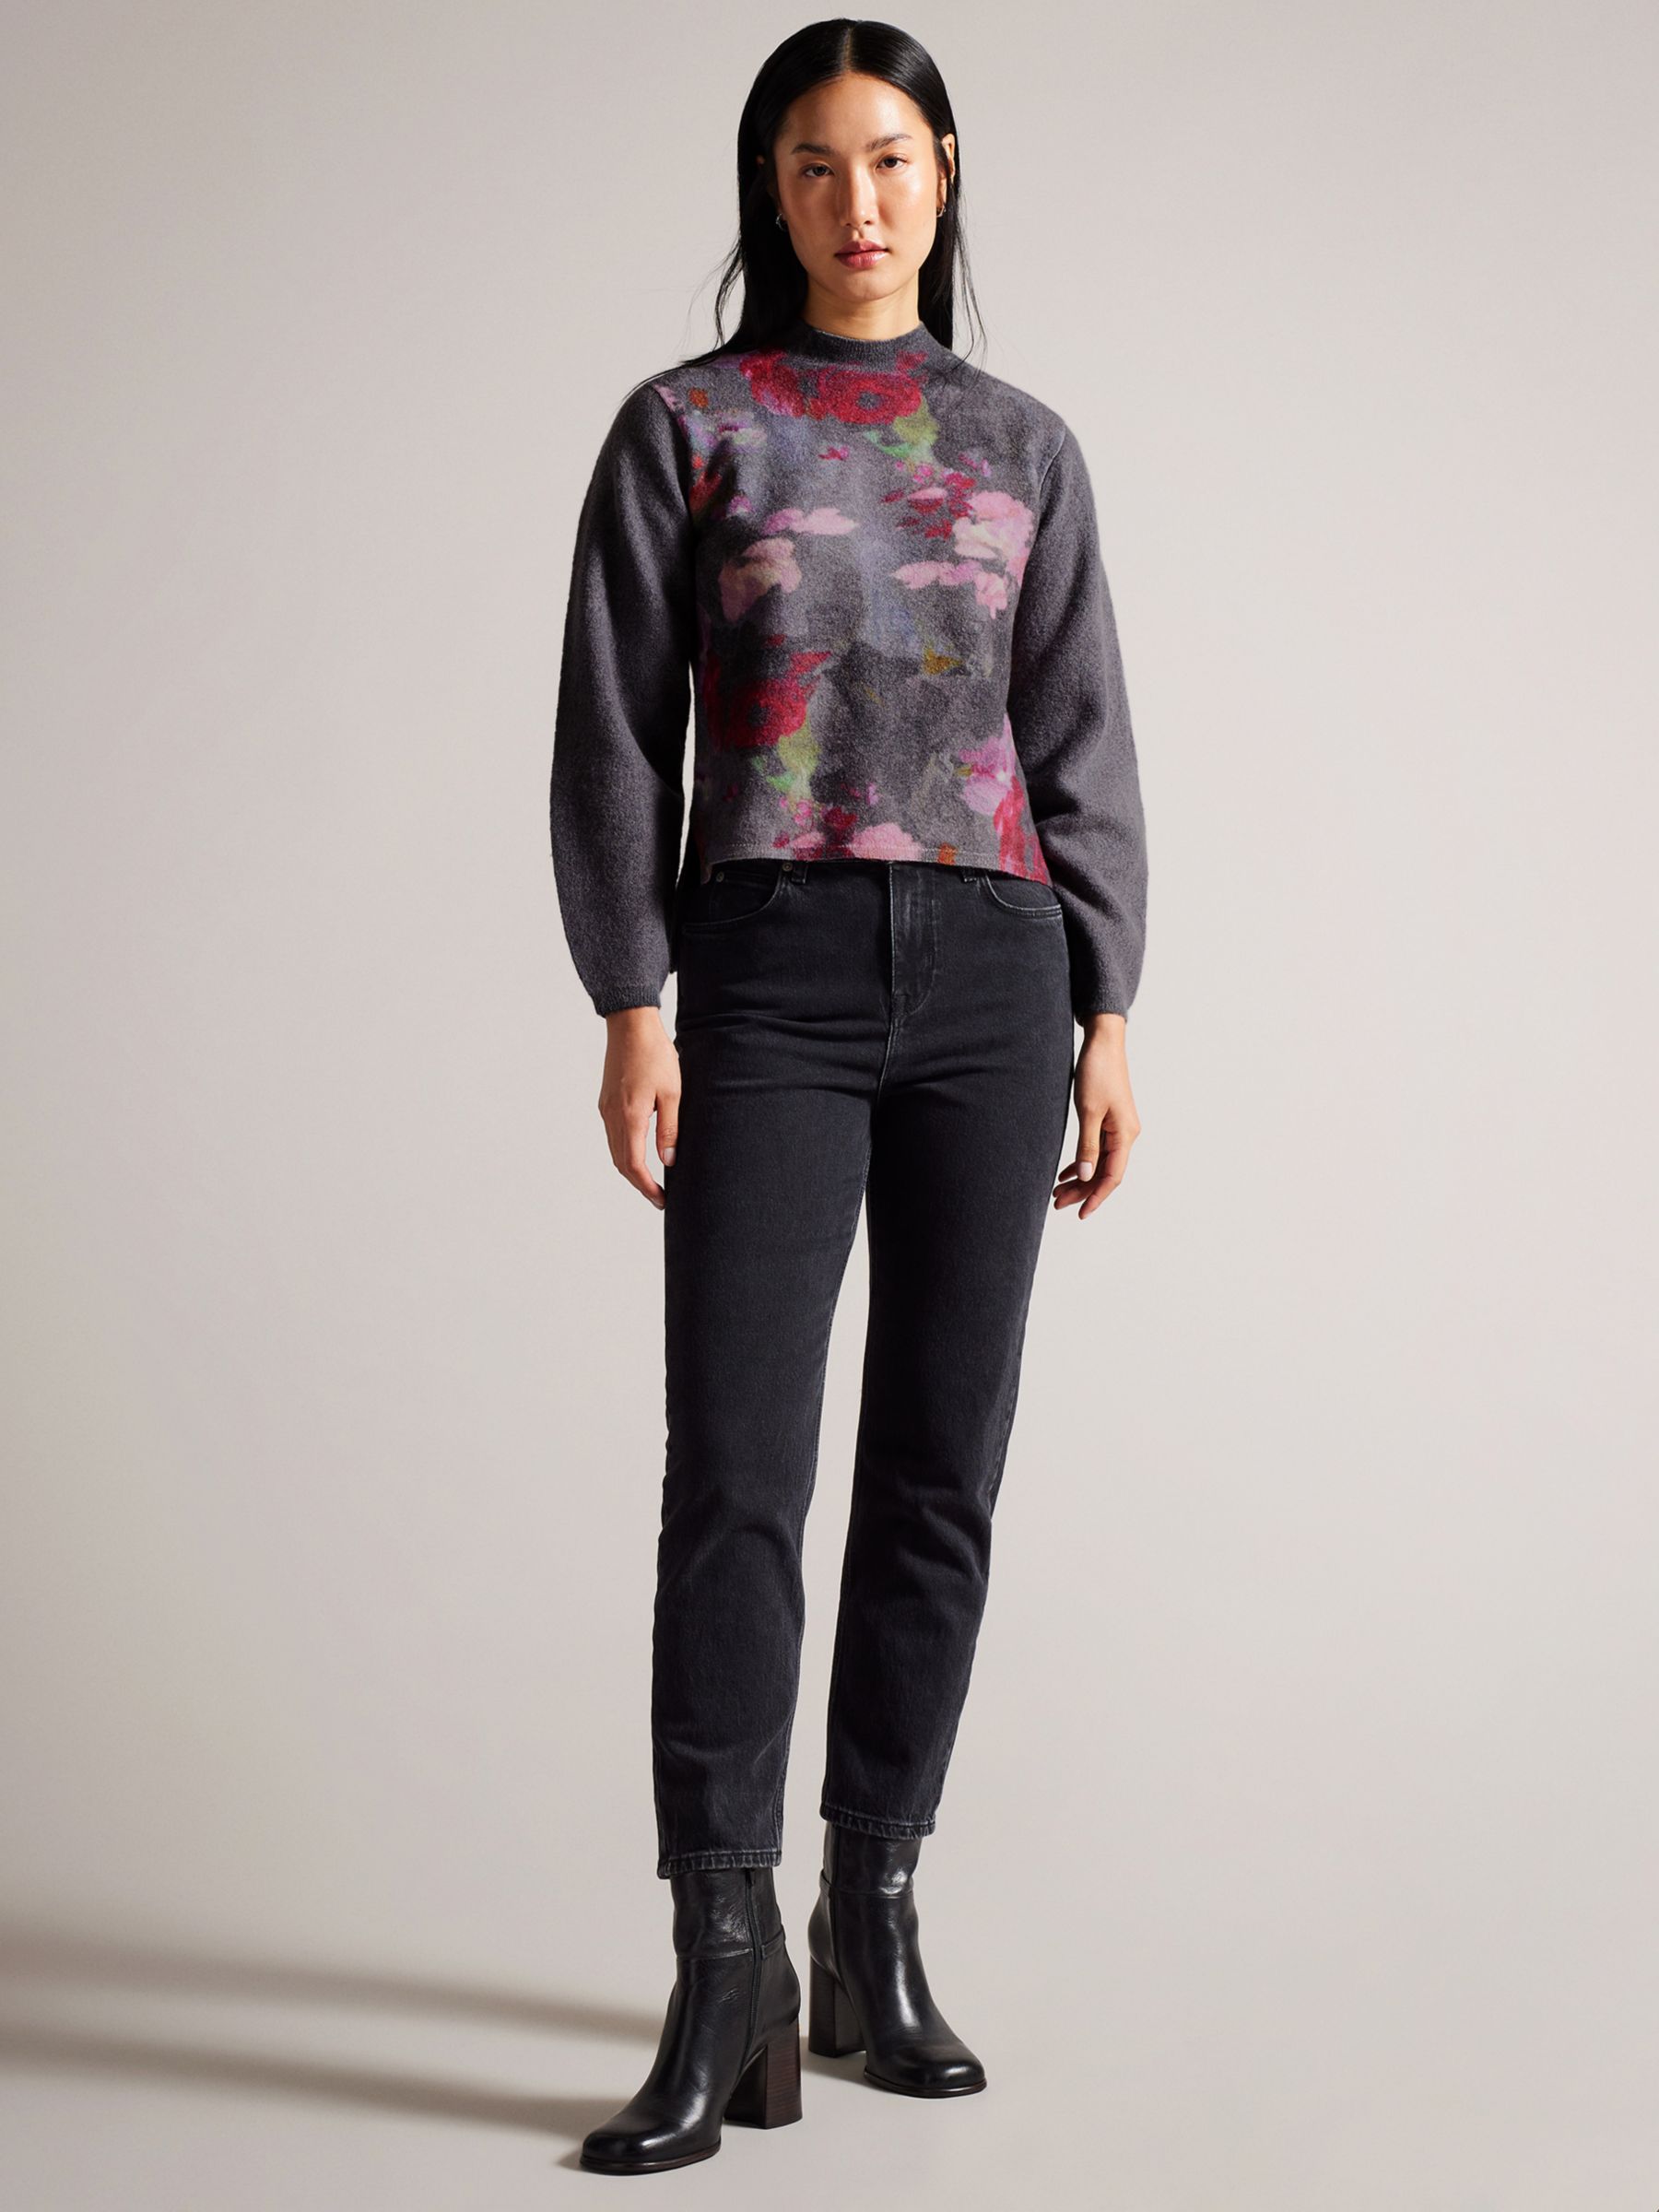 Ted Baker Daysiyy Floral Wool Jumper, Multi, S